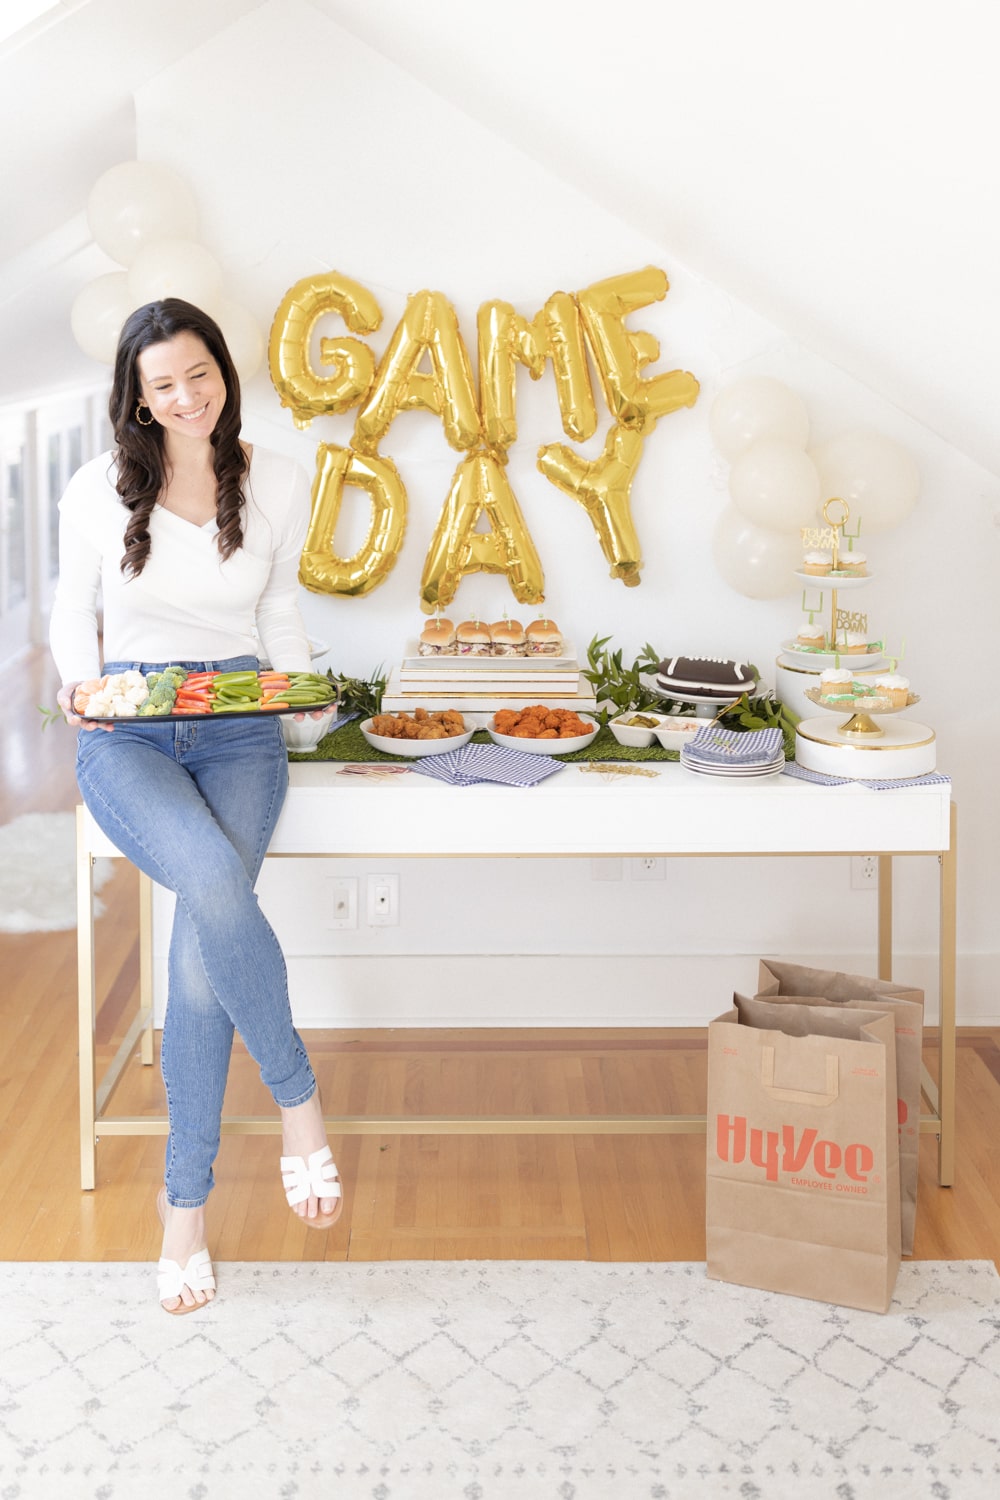 Game day food menu created for Hy-Vee by blogger Stephanie Ziajka on Diary of a Debutante